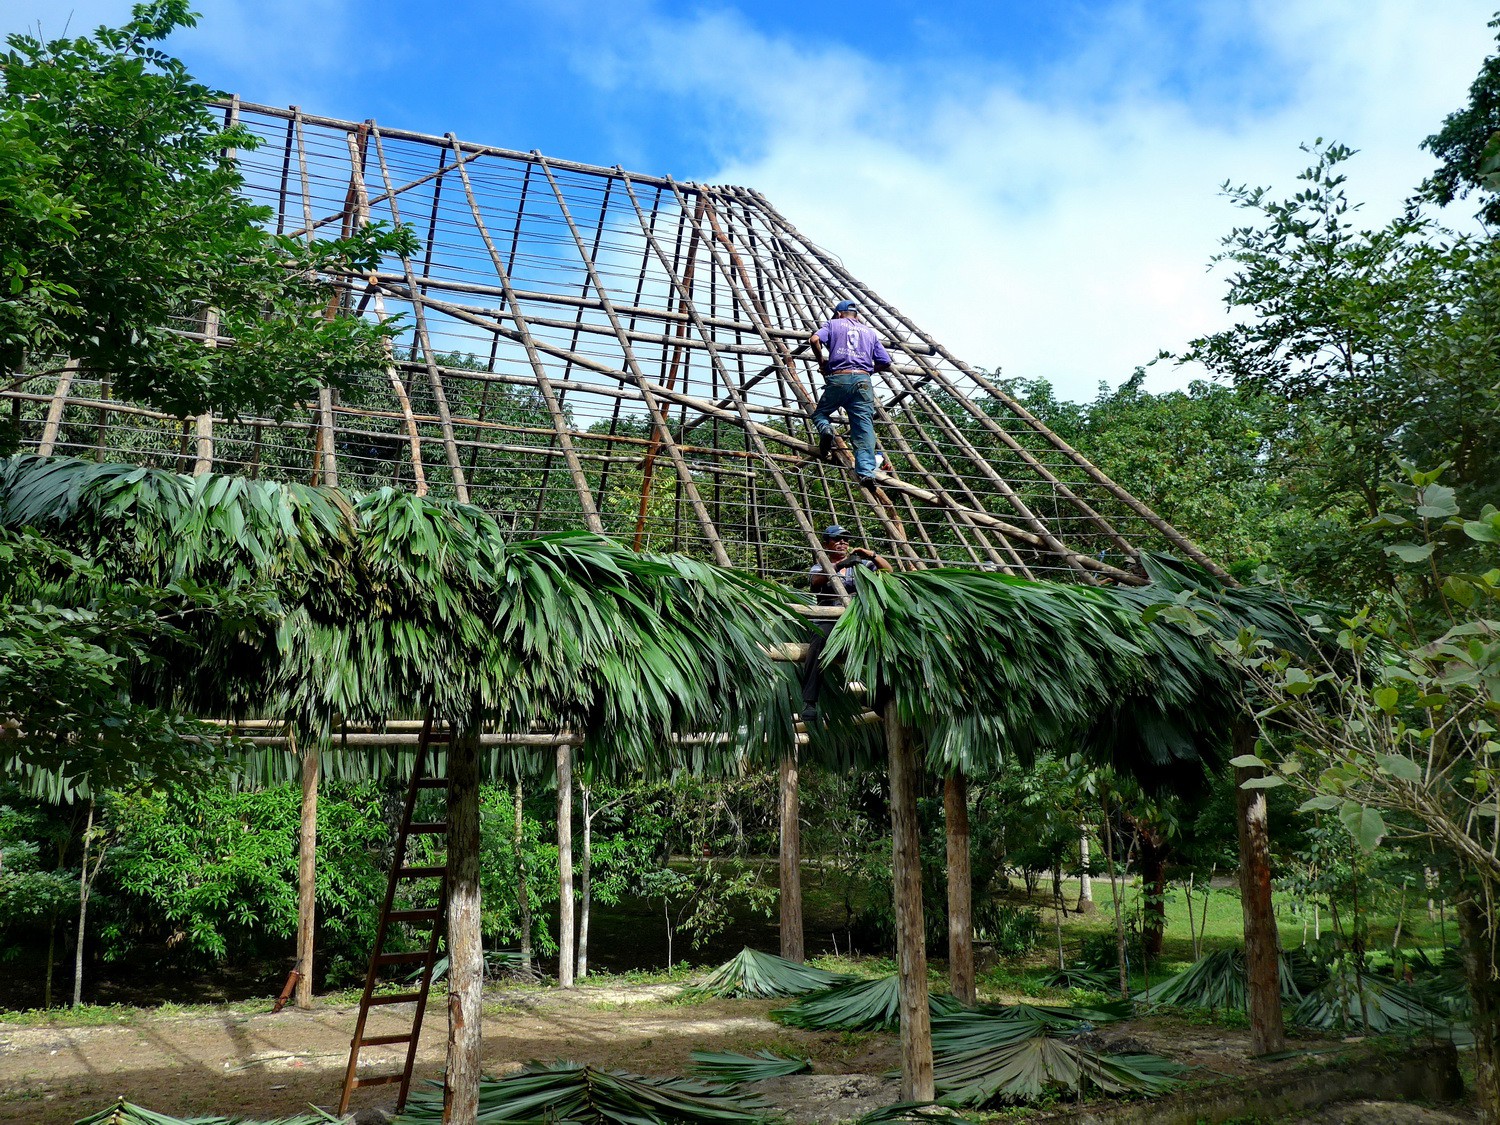 Construction of a roof at the entrance of Tikal